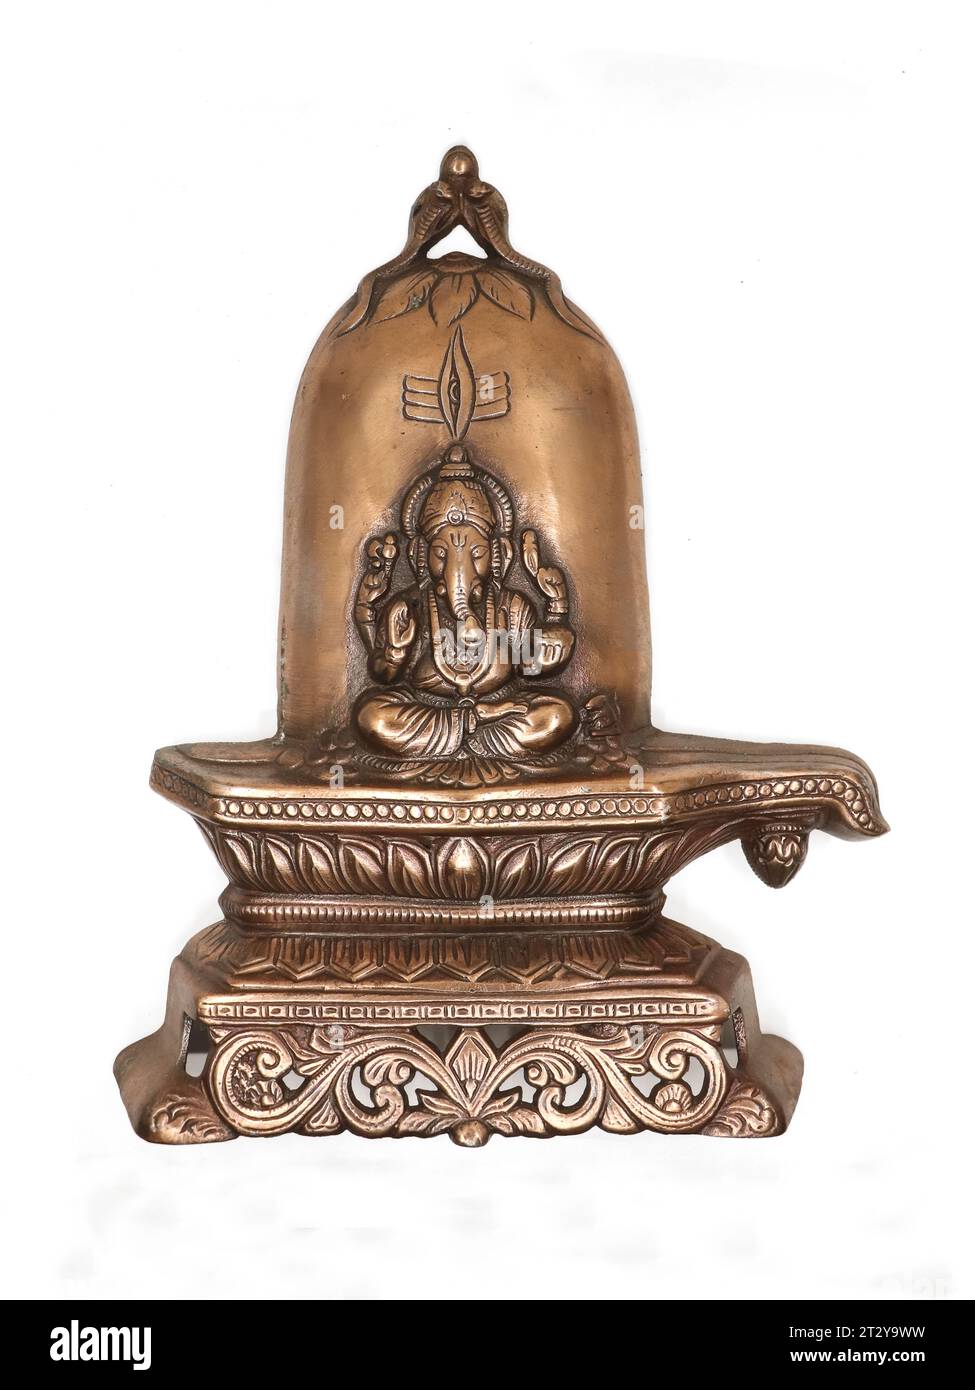 a bronze-copper statue of lord ganesh sitting on a sacred shiva linga stone decorated with pattern and carving isolated in a white background Stock Photo